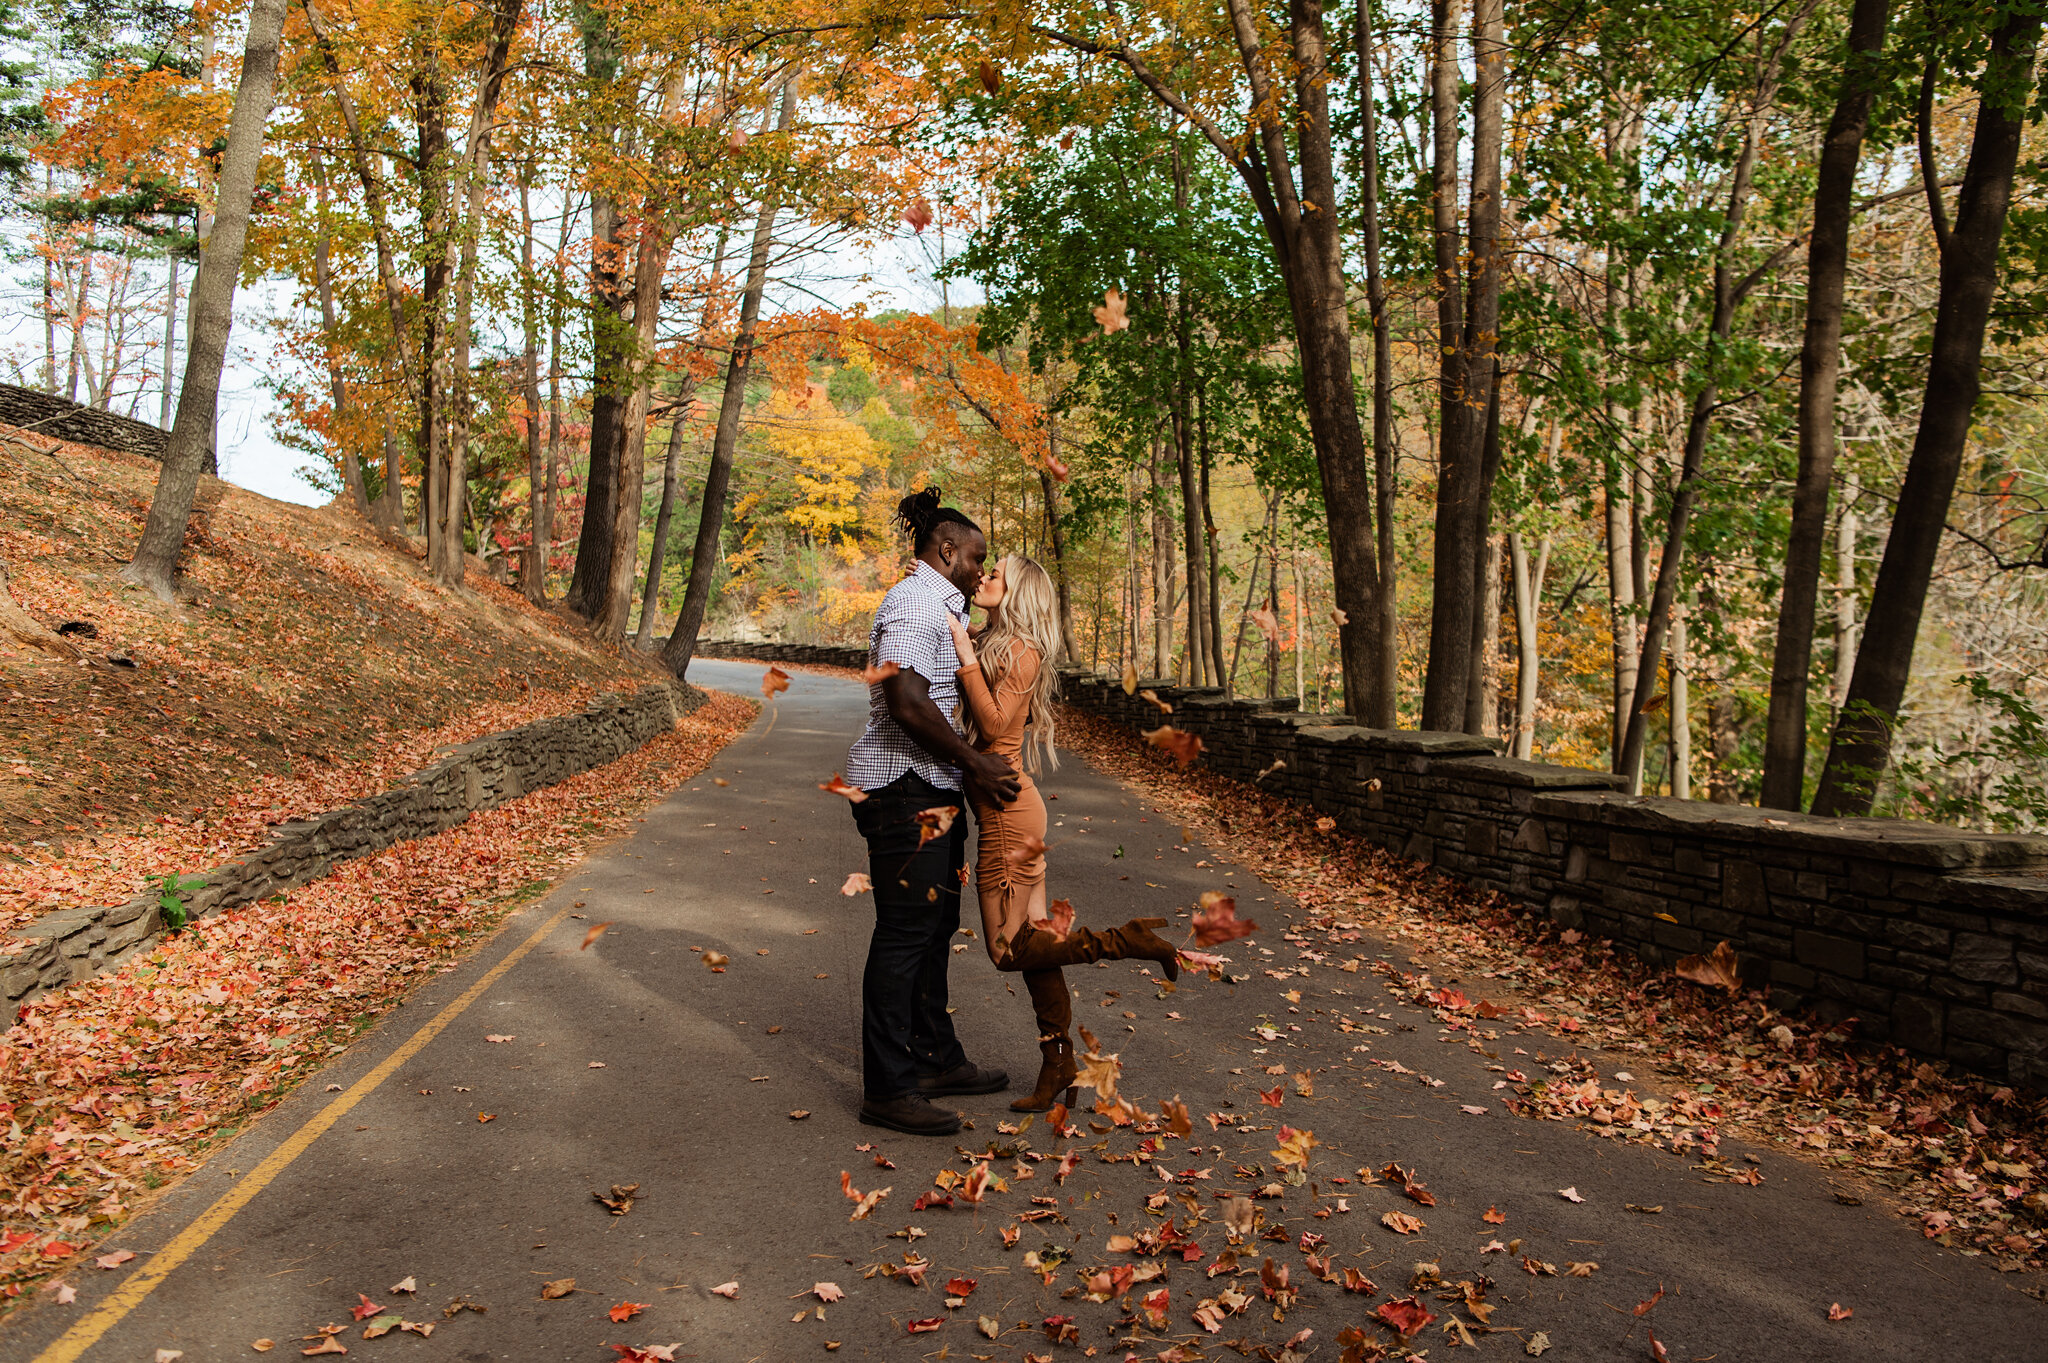 Letchworth_State_Park_Rochester_Couples_Session_JILL_STUDIO_Rochester_NY_Photographer_9185.jpg